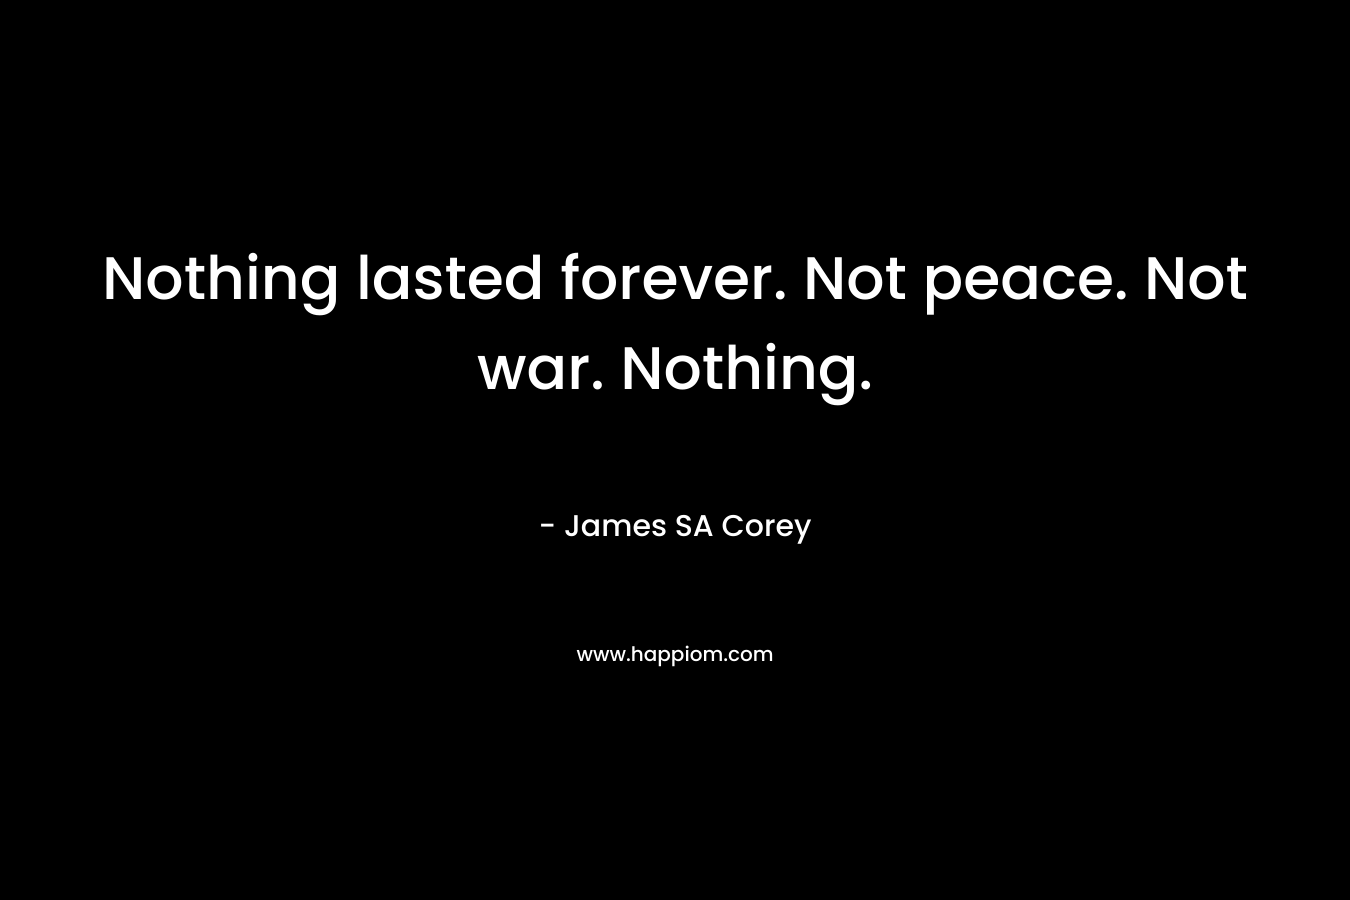 Nothing lasted forever. Not peace. Not war. Nothing.